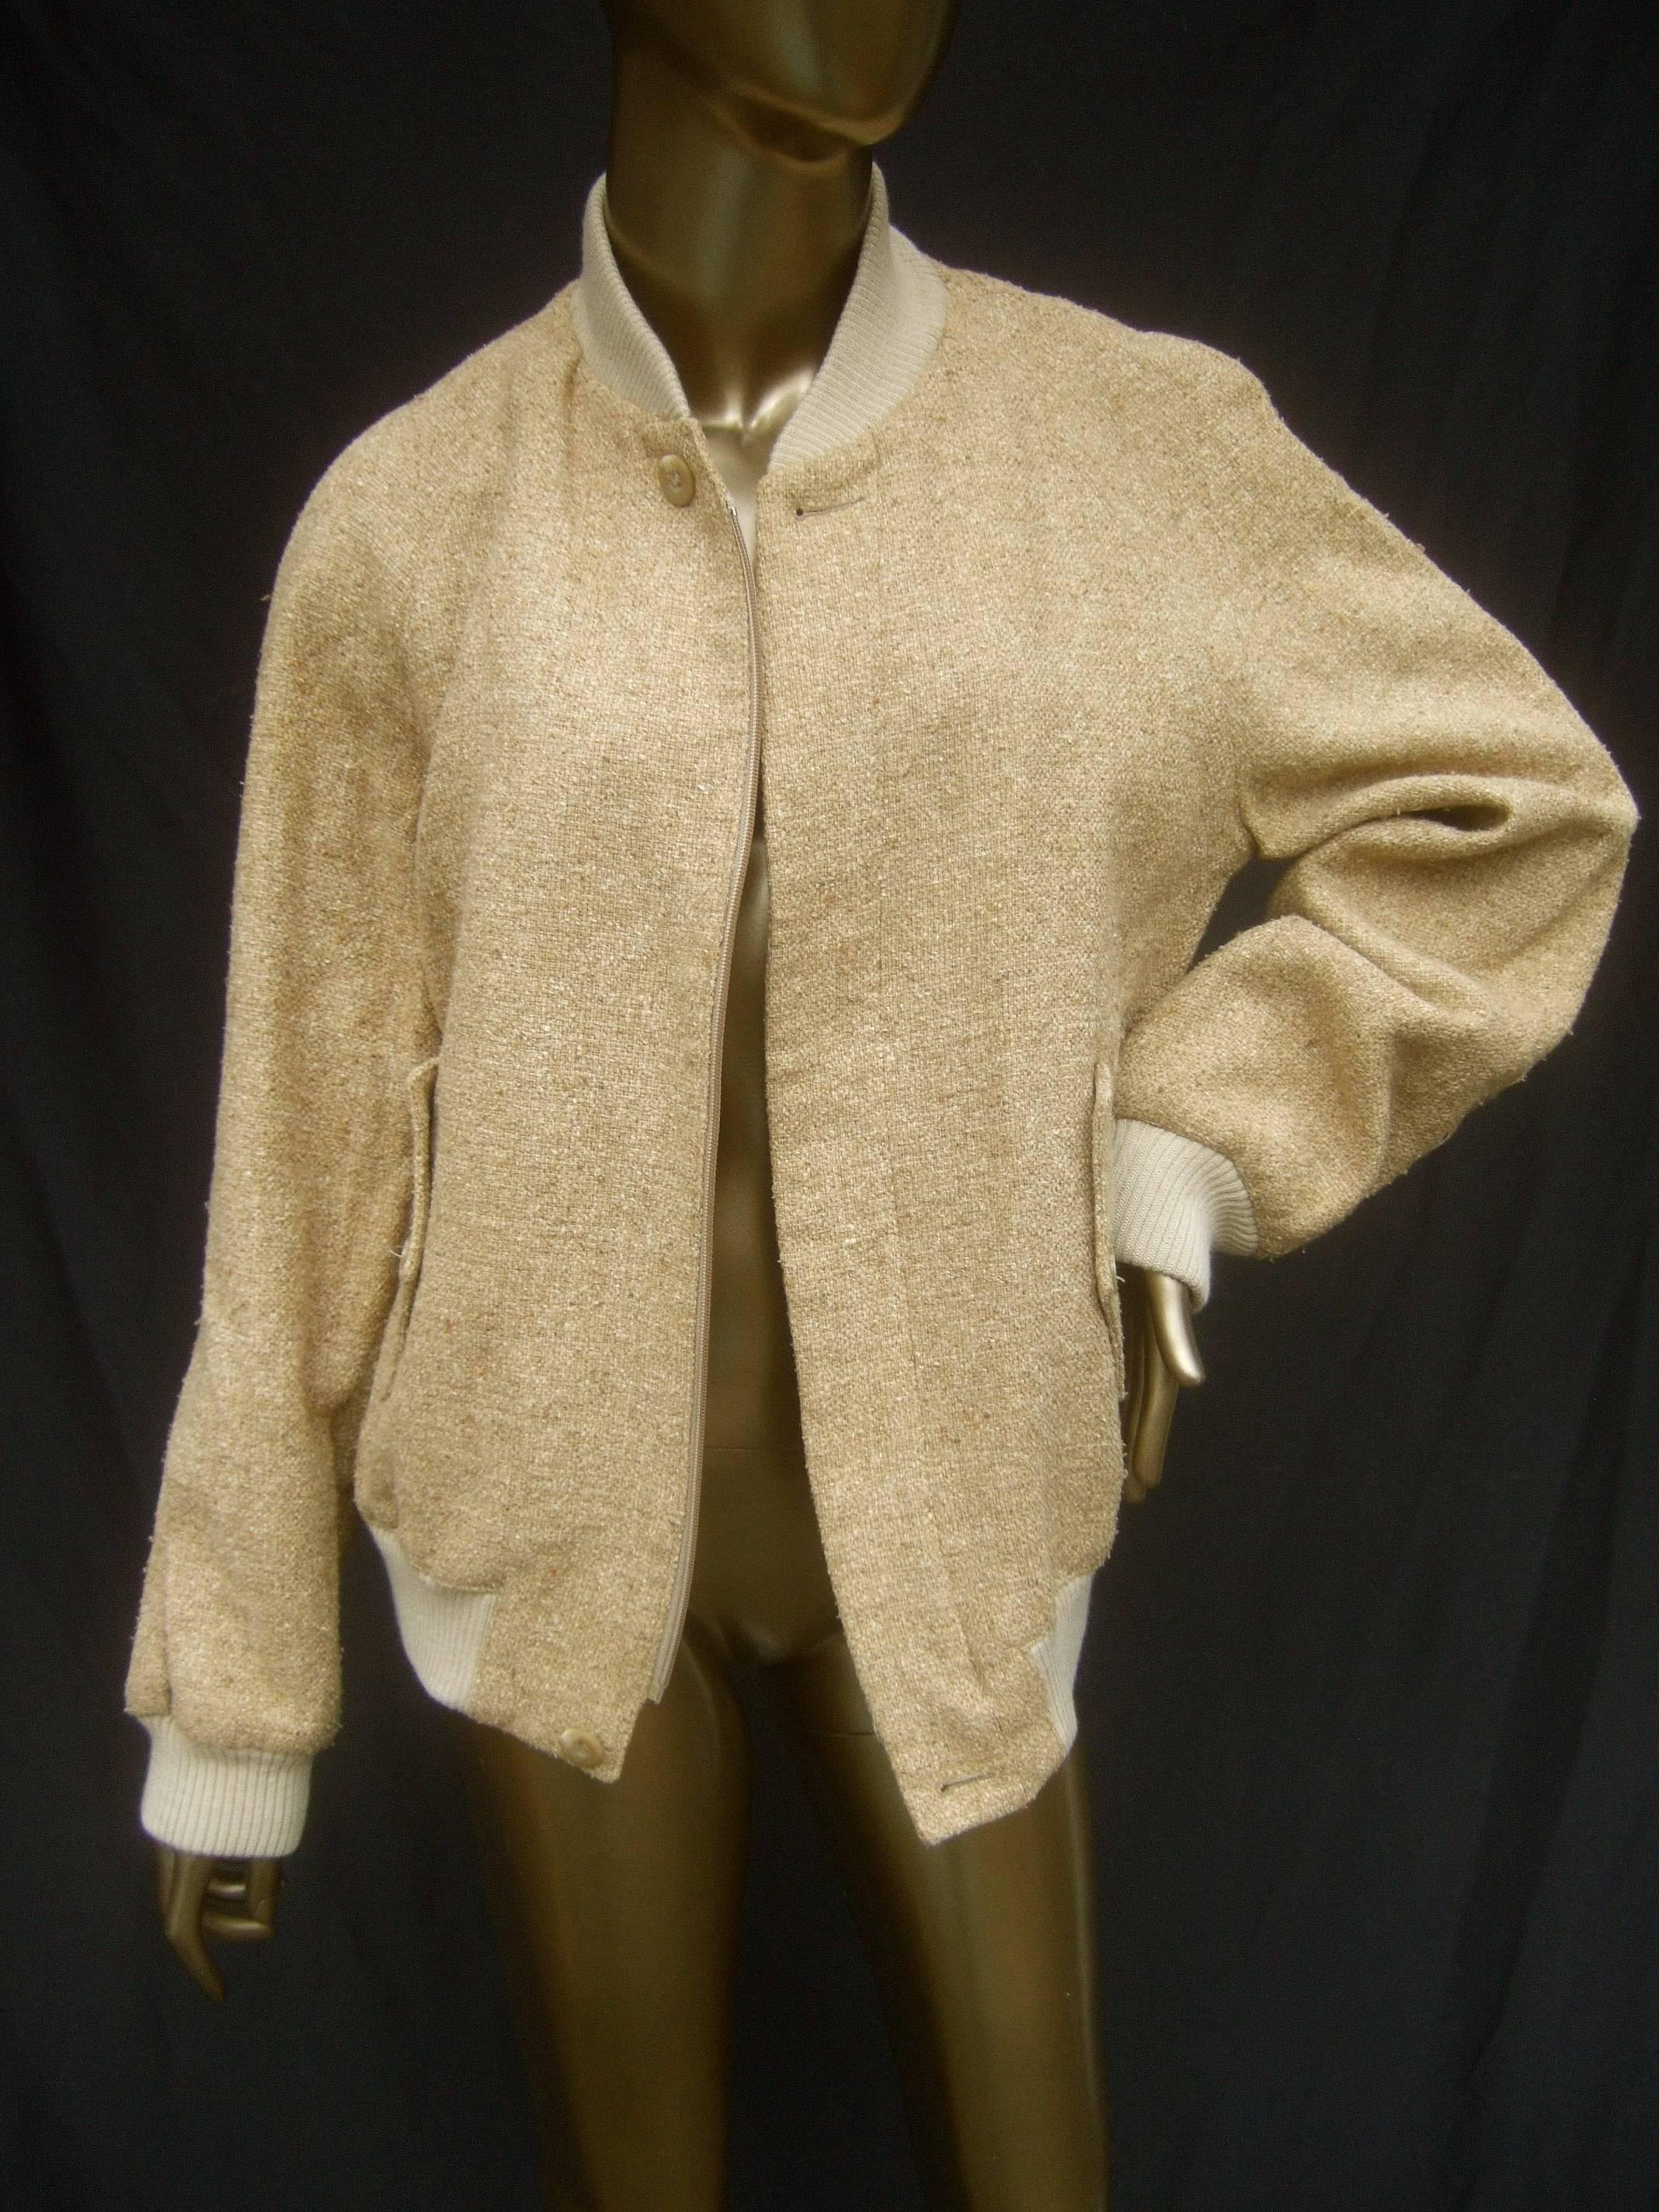 Yves Saint Laurent Beige burlap linen unisex zippered jacket c 1970s
The sand color jacket is designed with a textured burlap
linen blend fabric that zippers down the front

The unisex style jacket is designed with raglan-style
shoulders. The